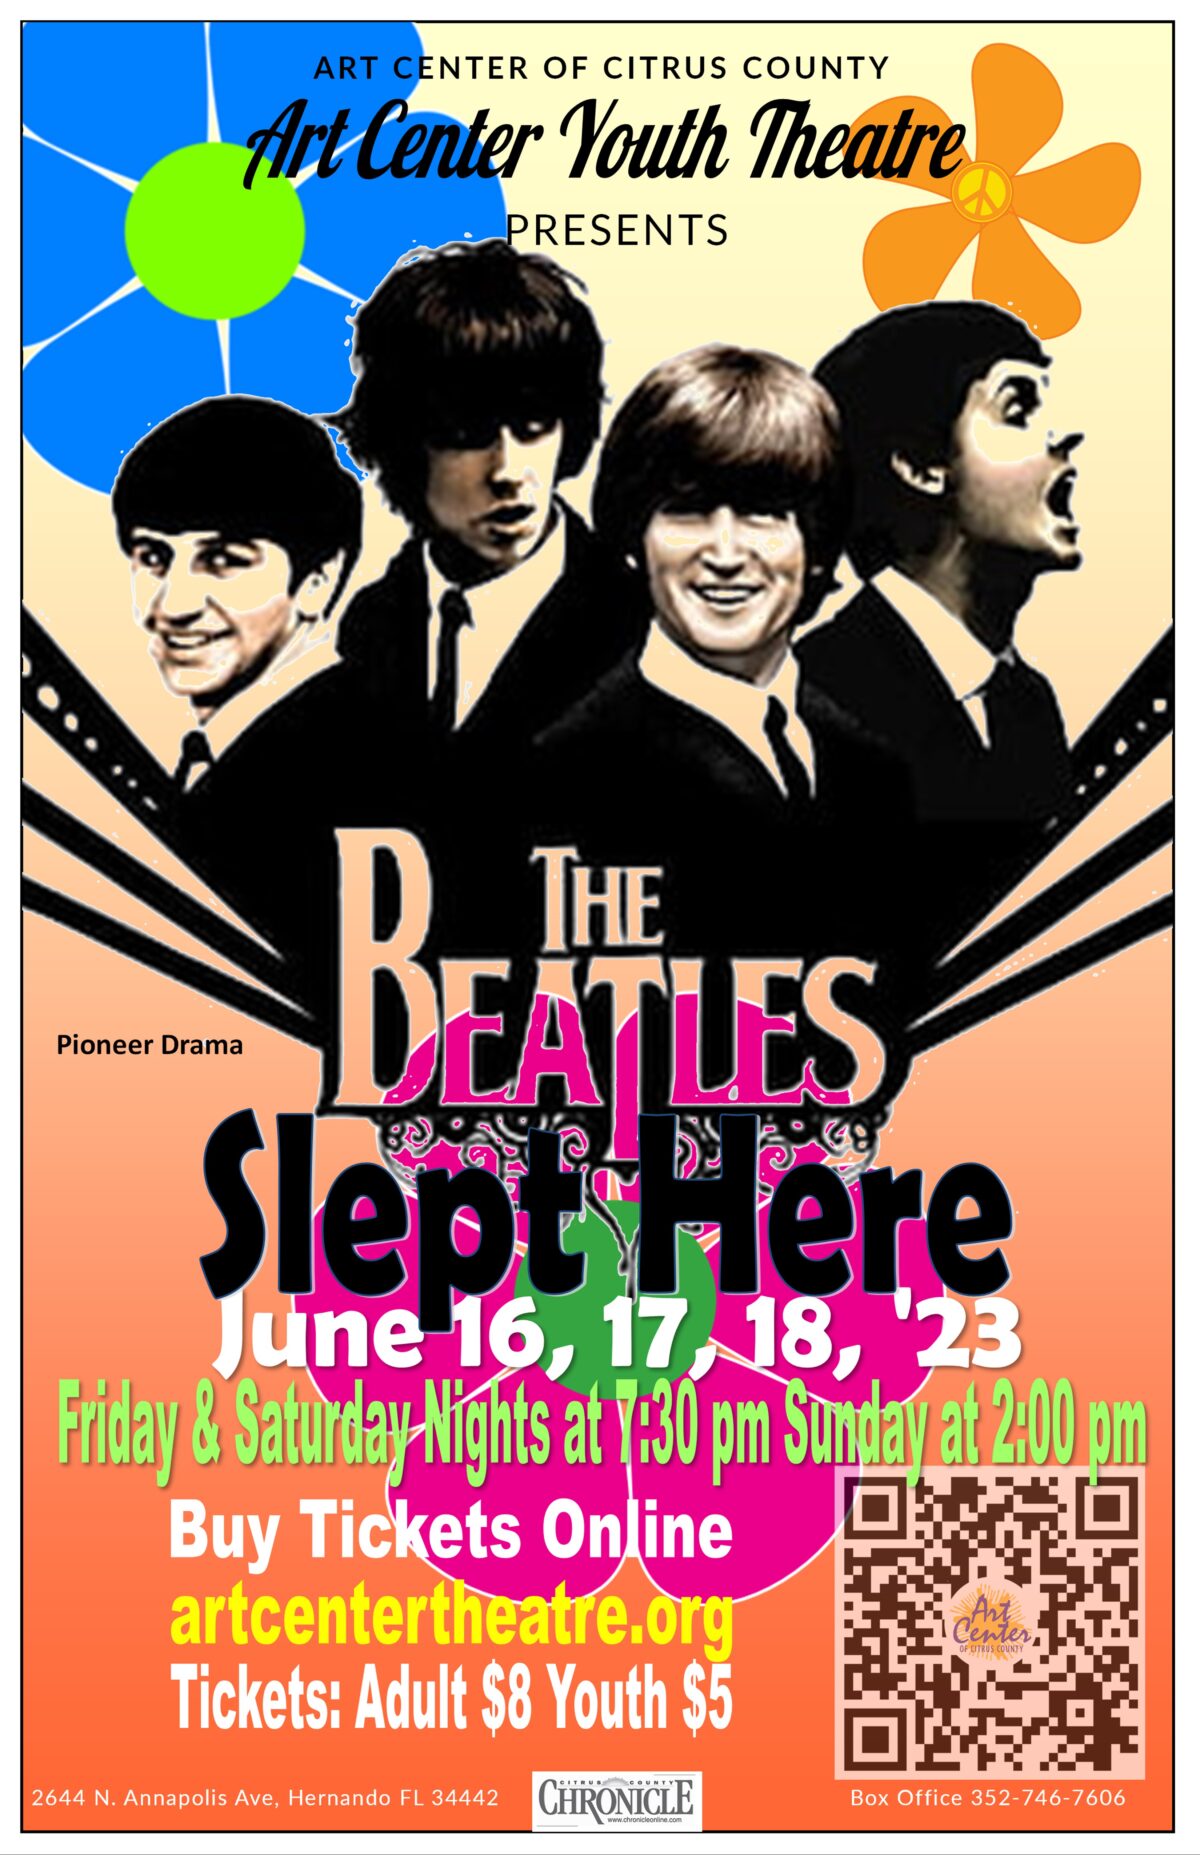 Art Center Youth Theatre Presents: The Beatles Slept Here June 16, 17, 18